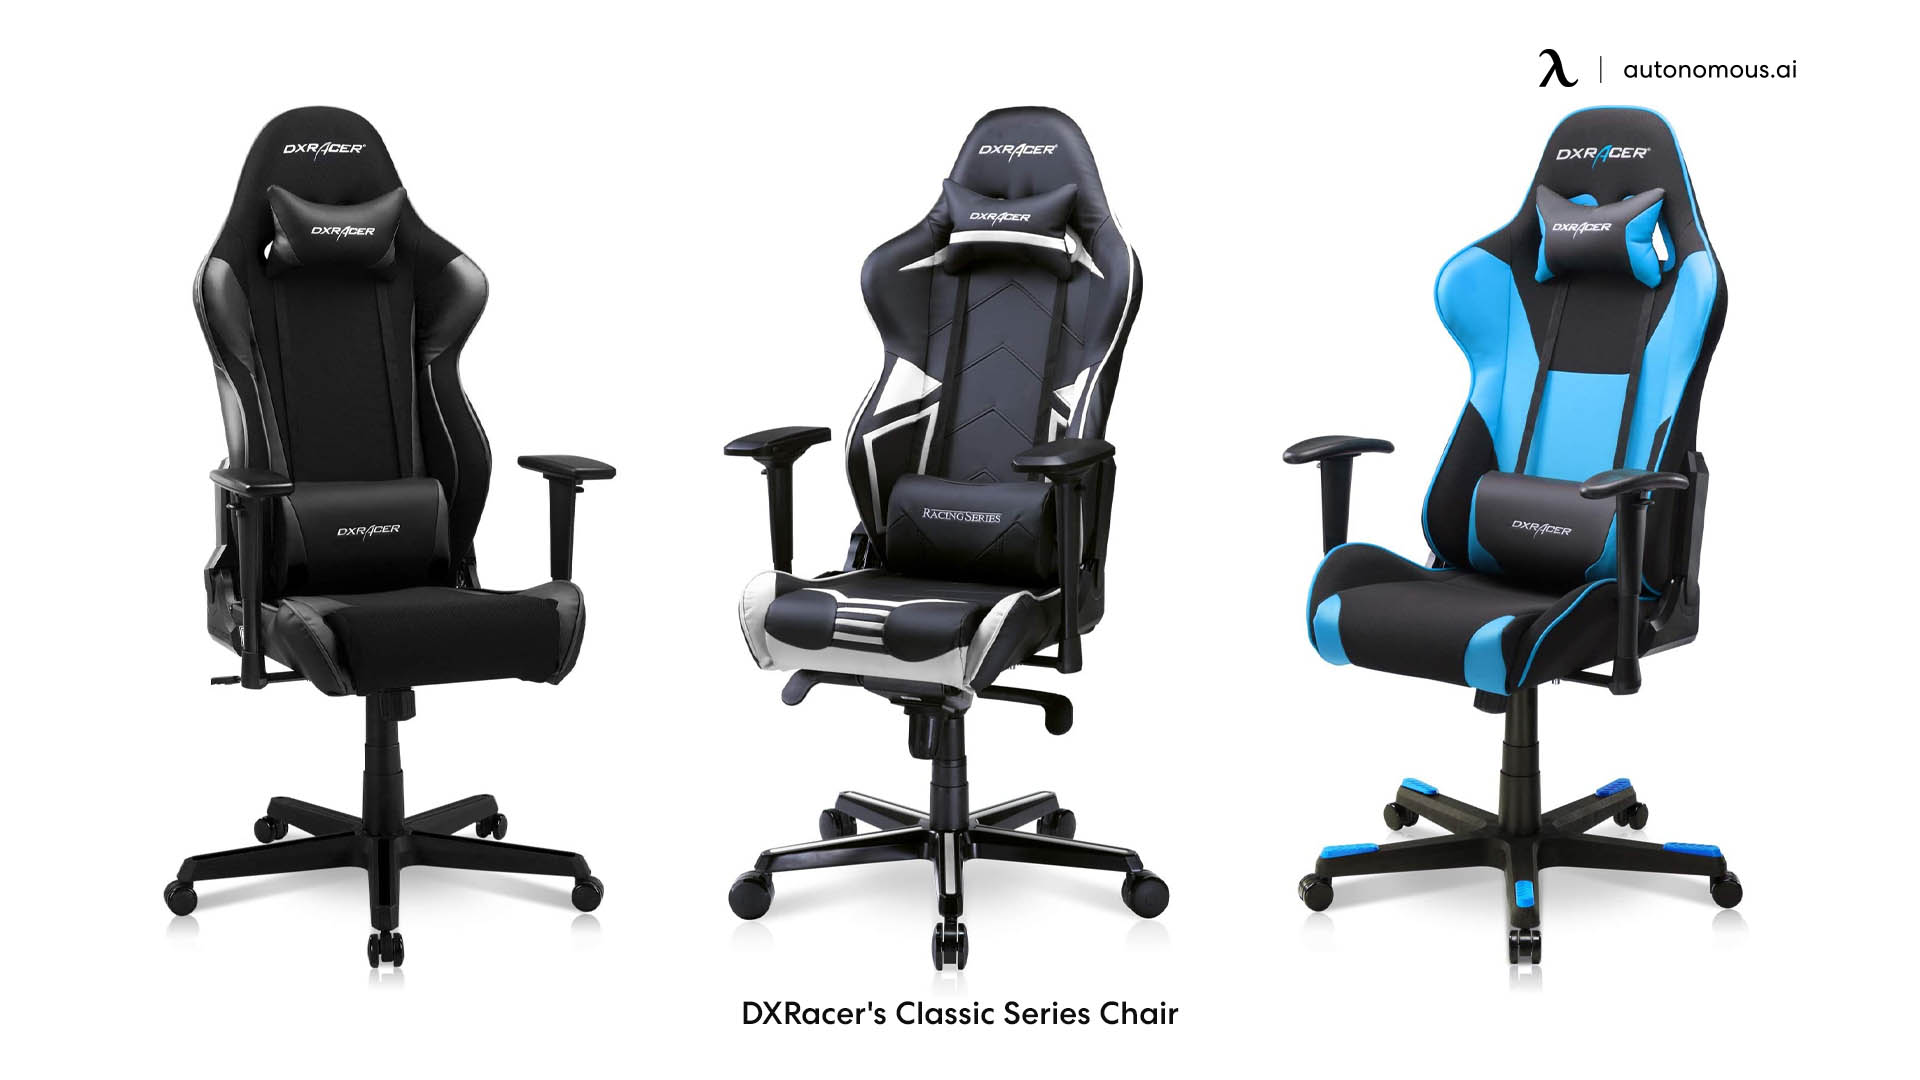 DXRacer's Classic Series comfy office chair